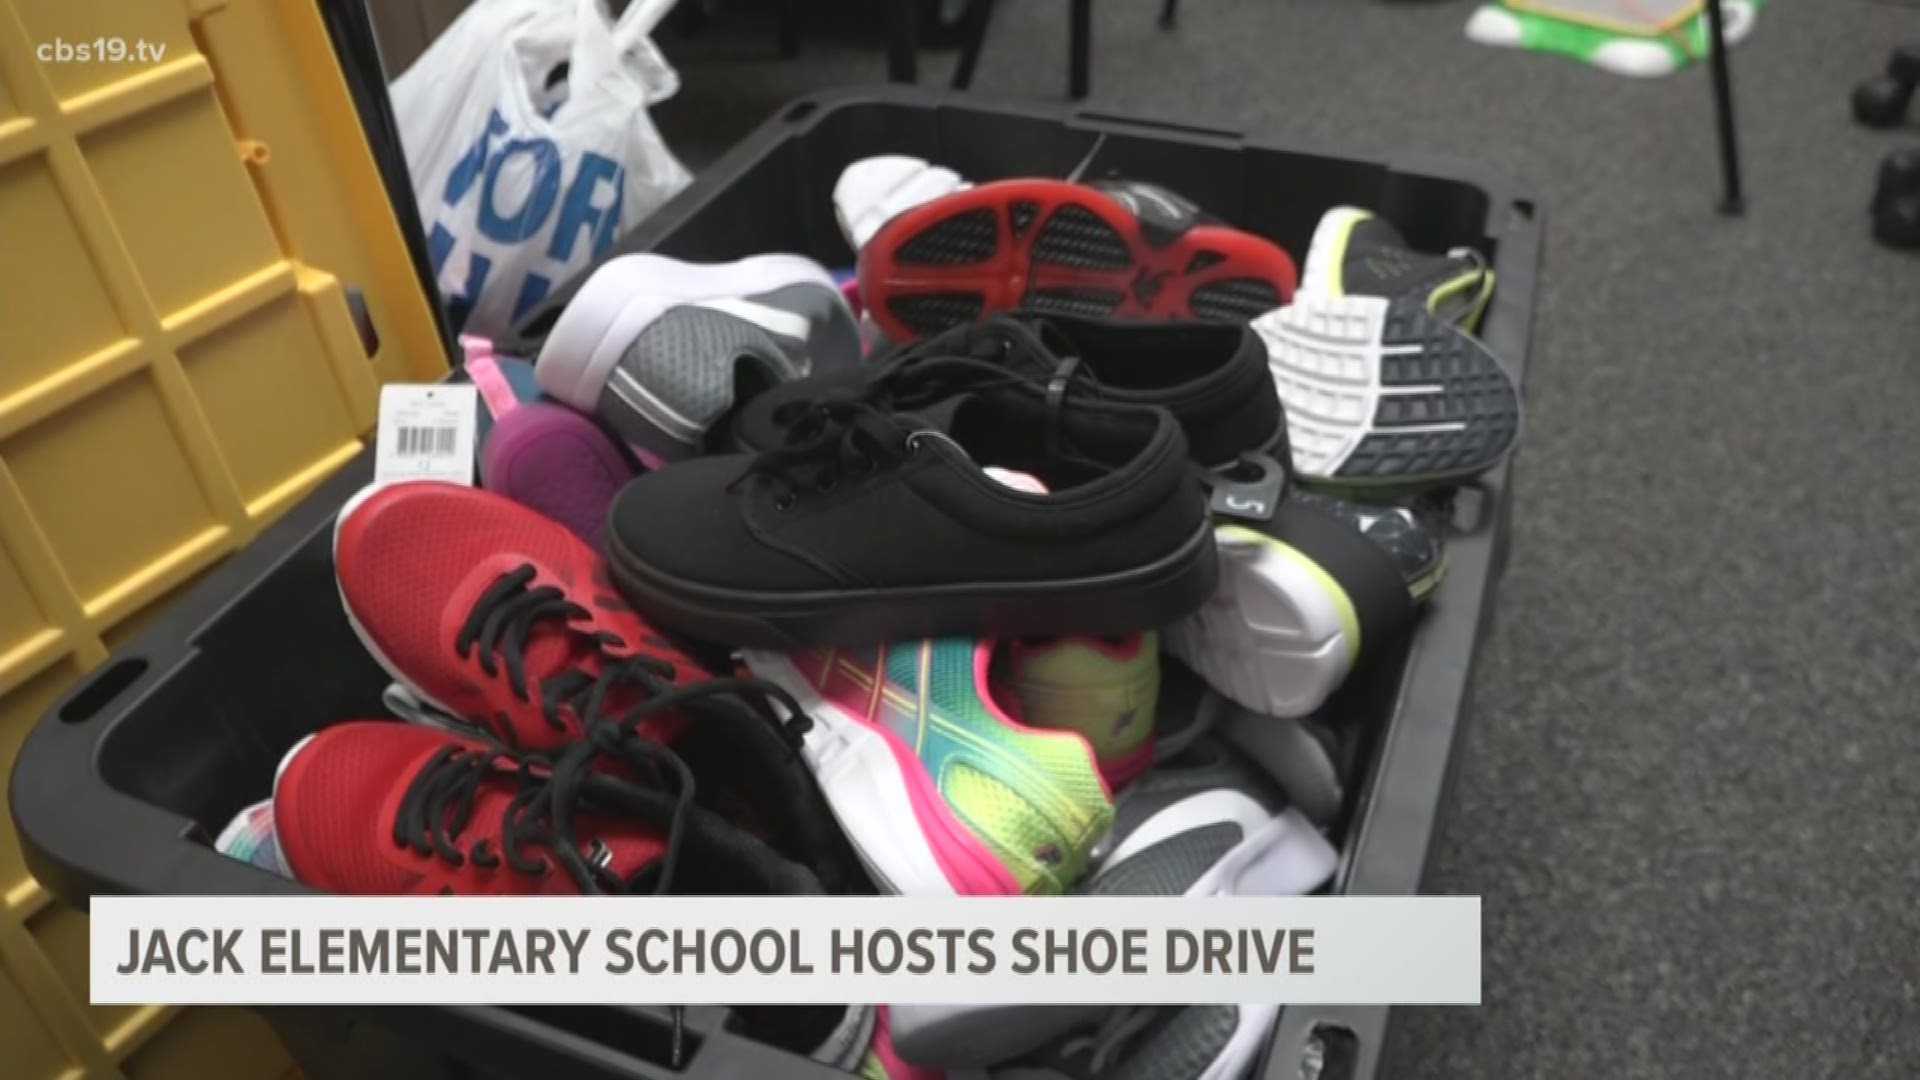 Jack Elementary School in Tyler is hoping to reach its goal of collecting 500 shoes for students in need within its district.